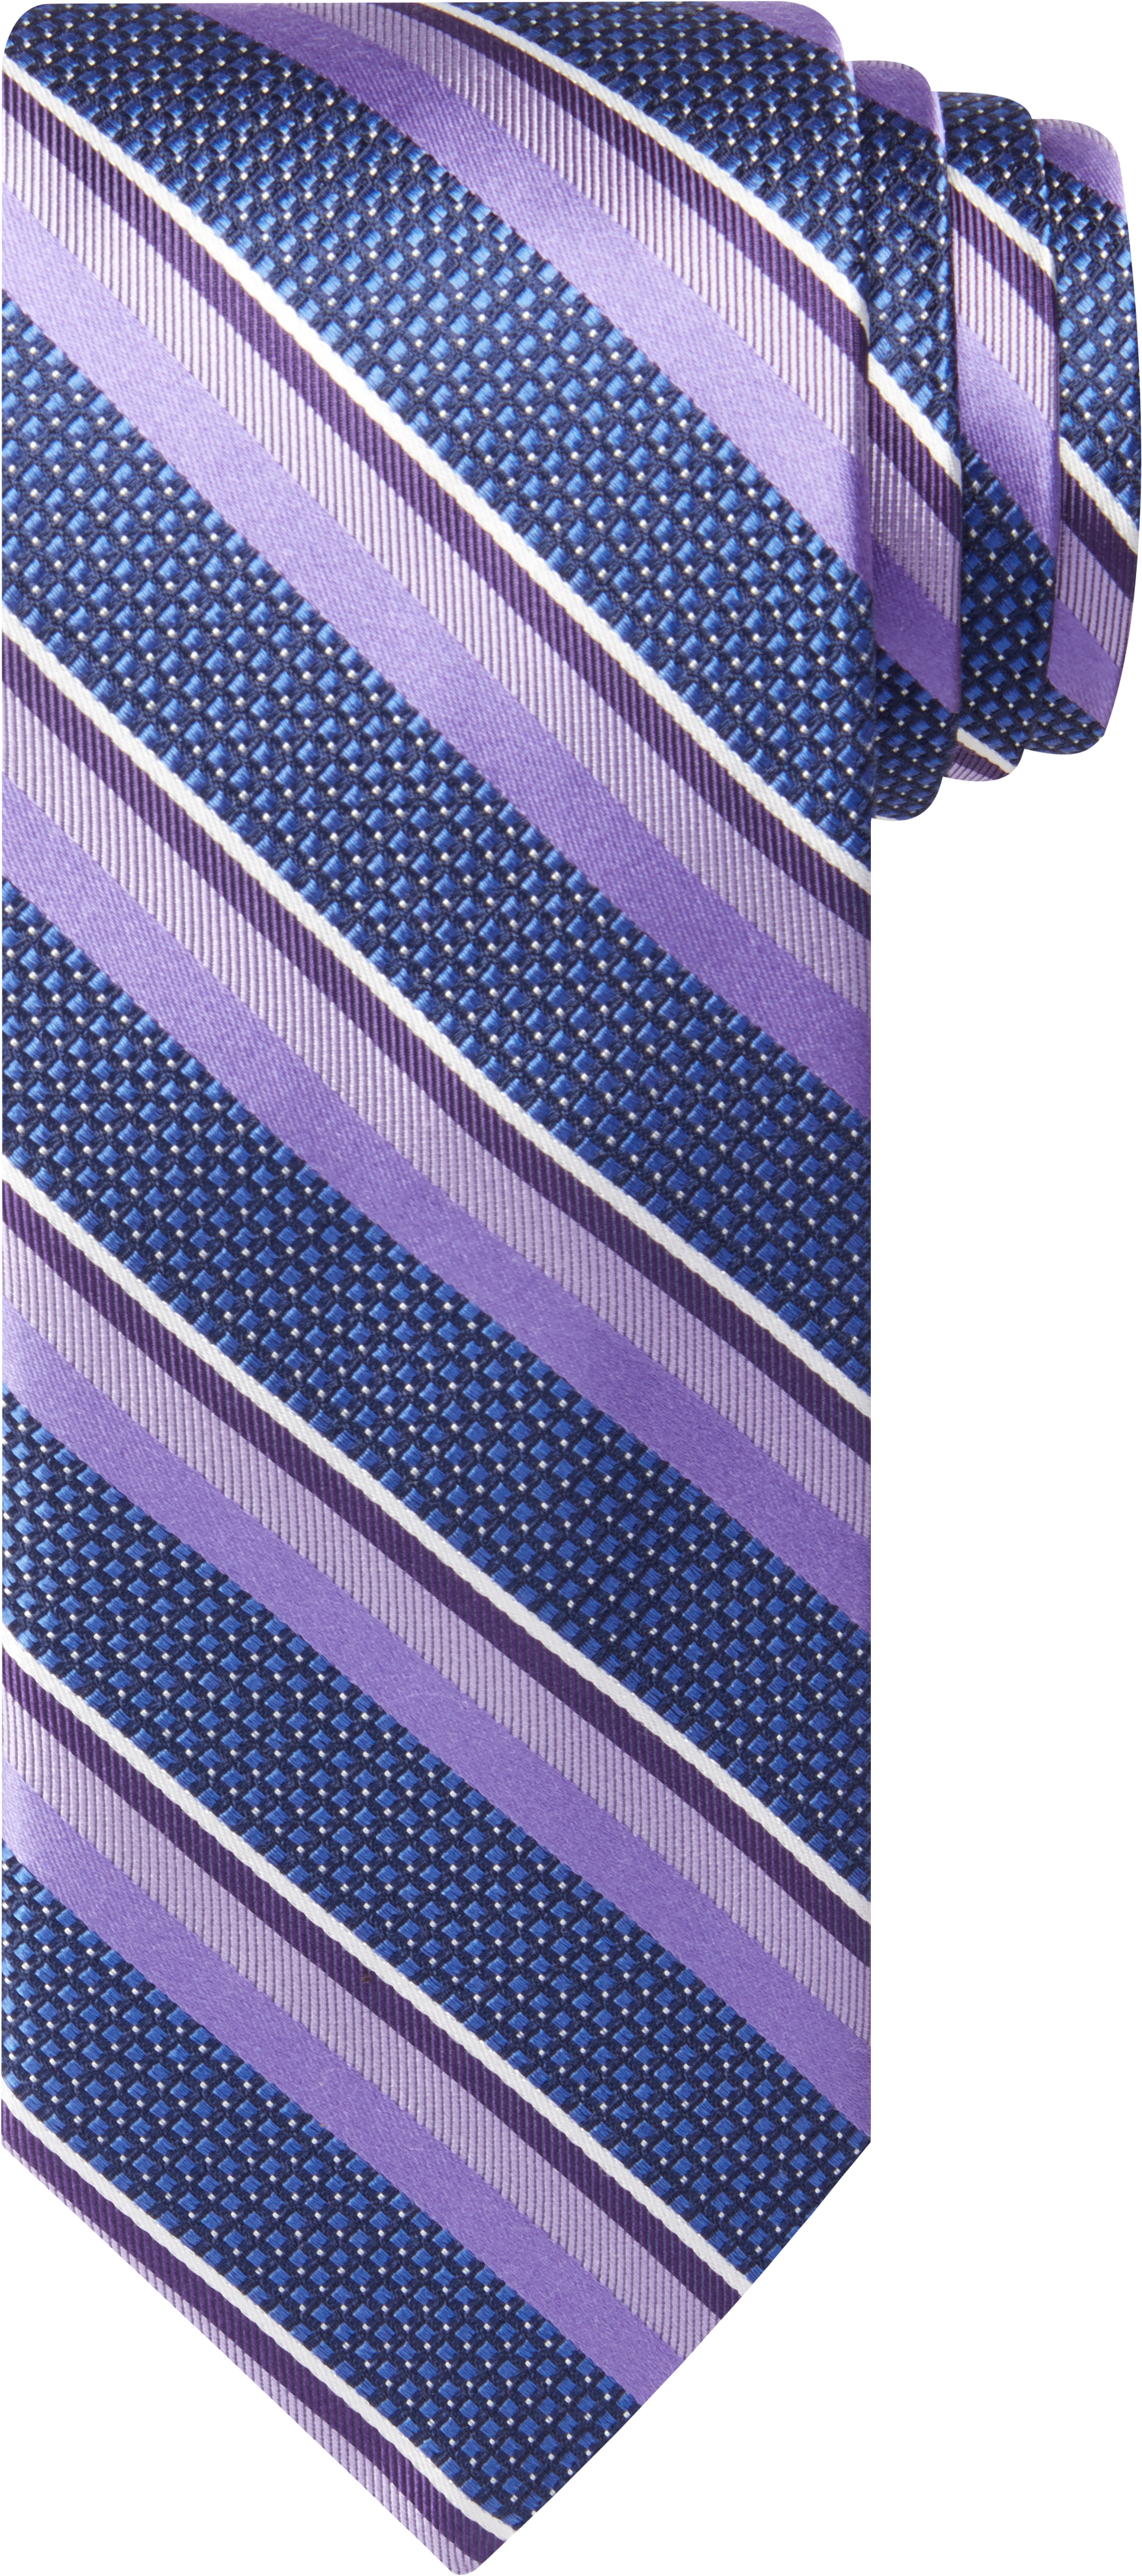 Reserve Collection Multi-Stripe Tie CLEARANCE - All Clearance | Jos A Bank